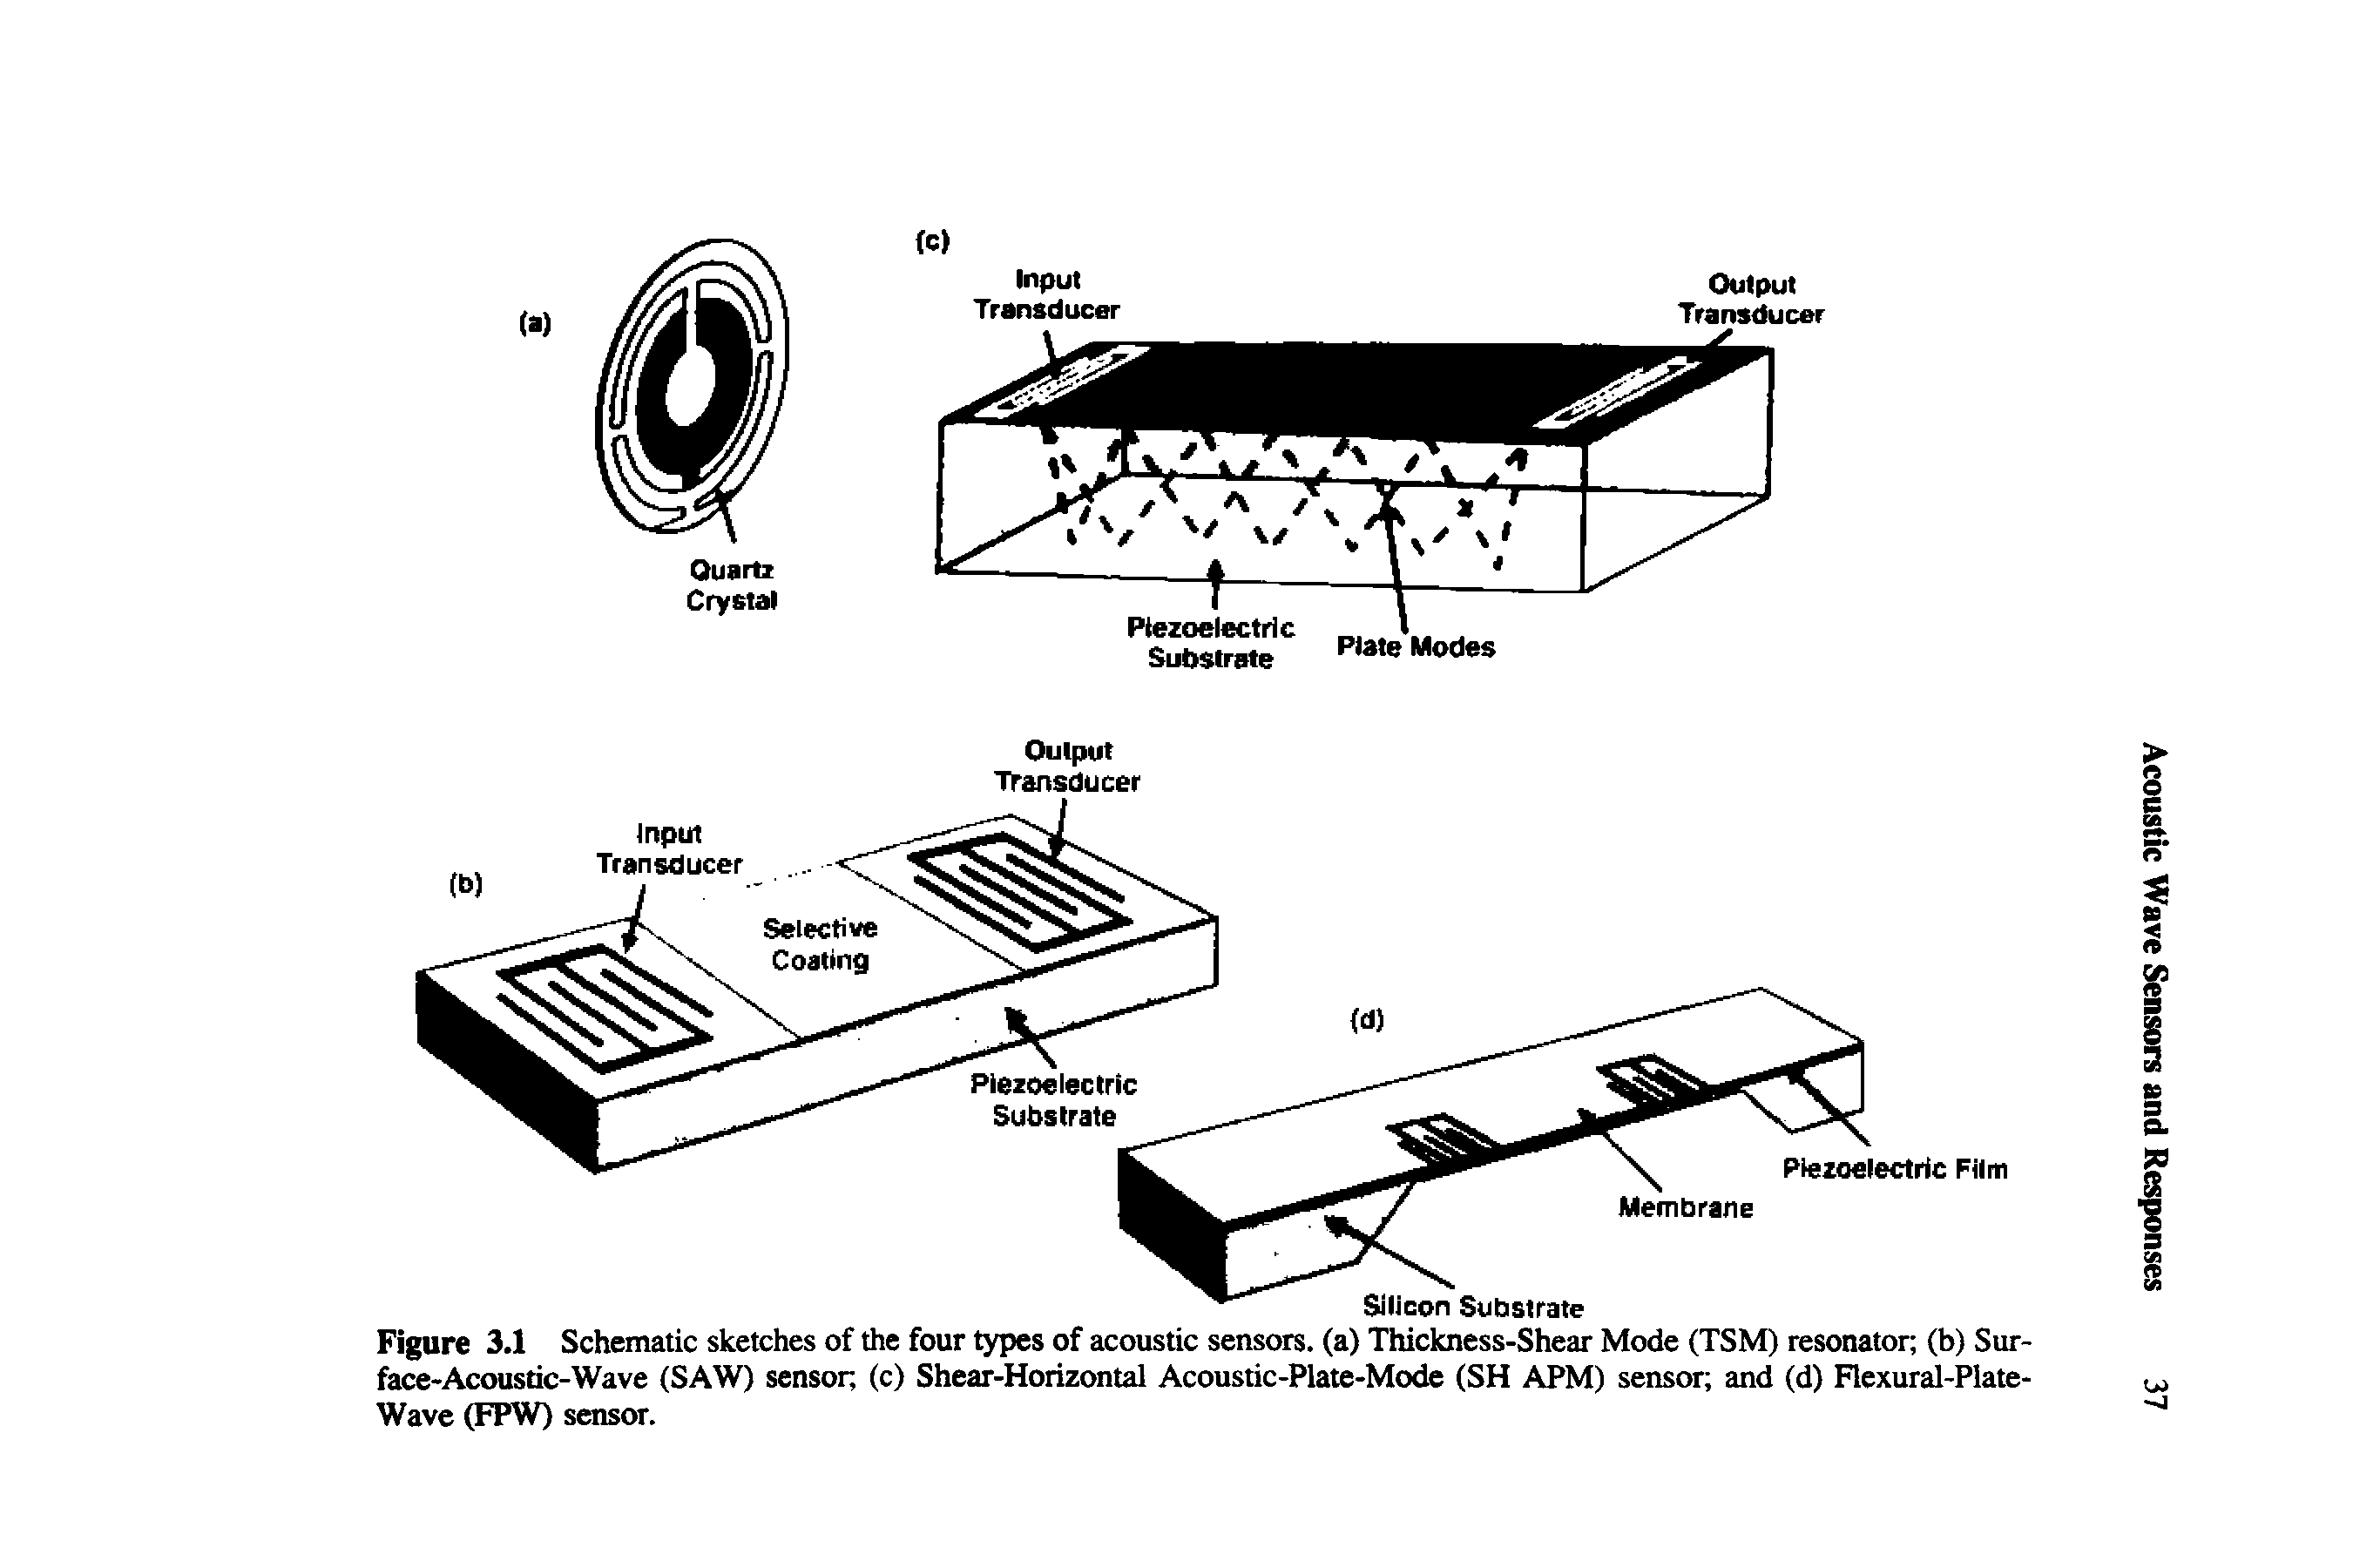 Figure 3.1 Schematic sketches of the four types of acoustic sensors, (a) Thickness-Shear Mode (TSM) resonator (b) Surface-Acoustic-Wave (SAW) sensor, (c) Shear-Horizontal Acoustic-Plate-Mode (SH APM) sensor, and (d) Flexural-Plate-Wave (FPW) sensor.